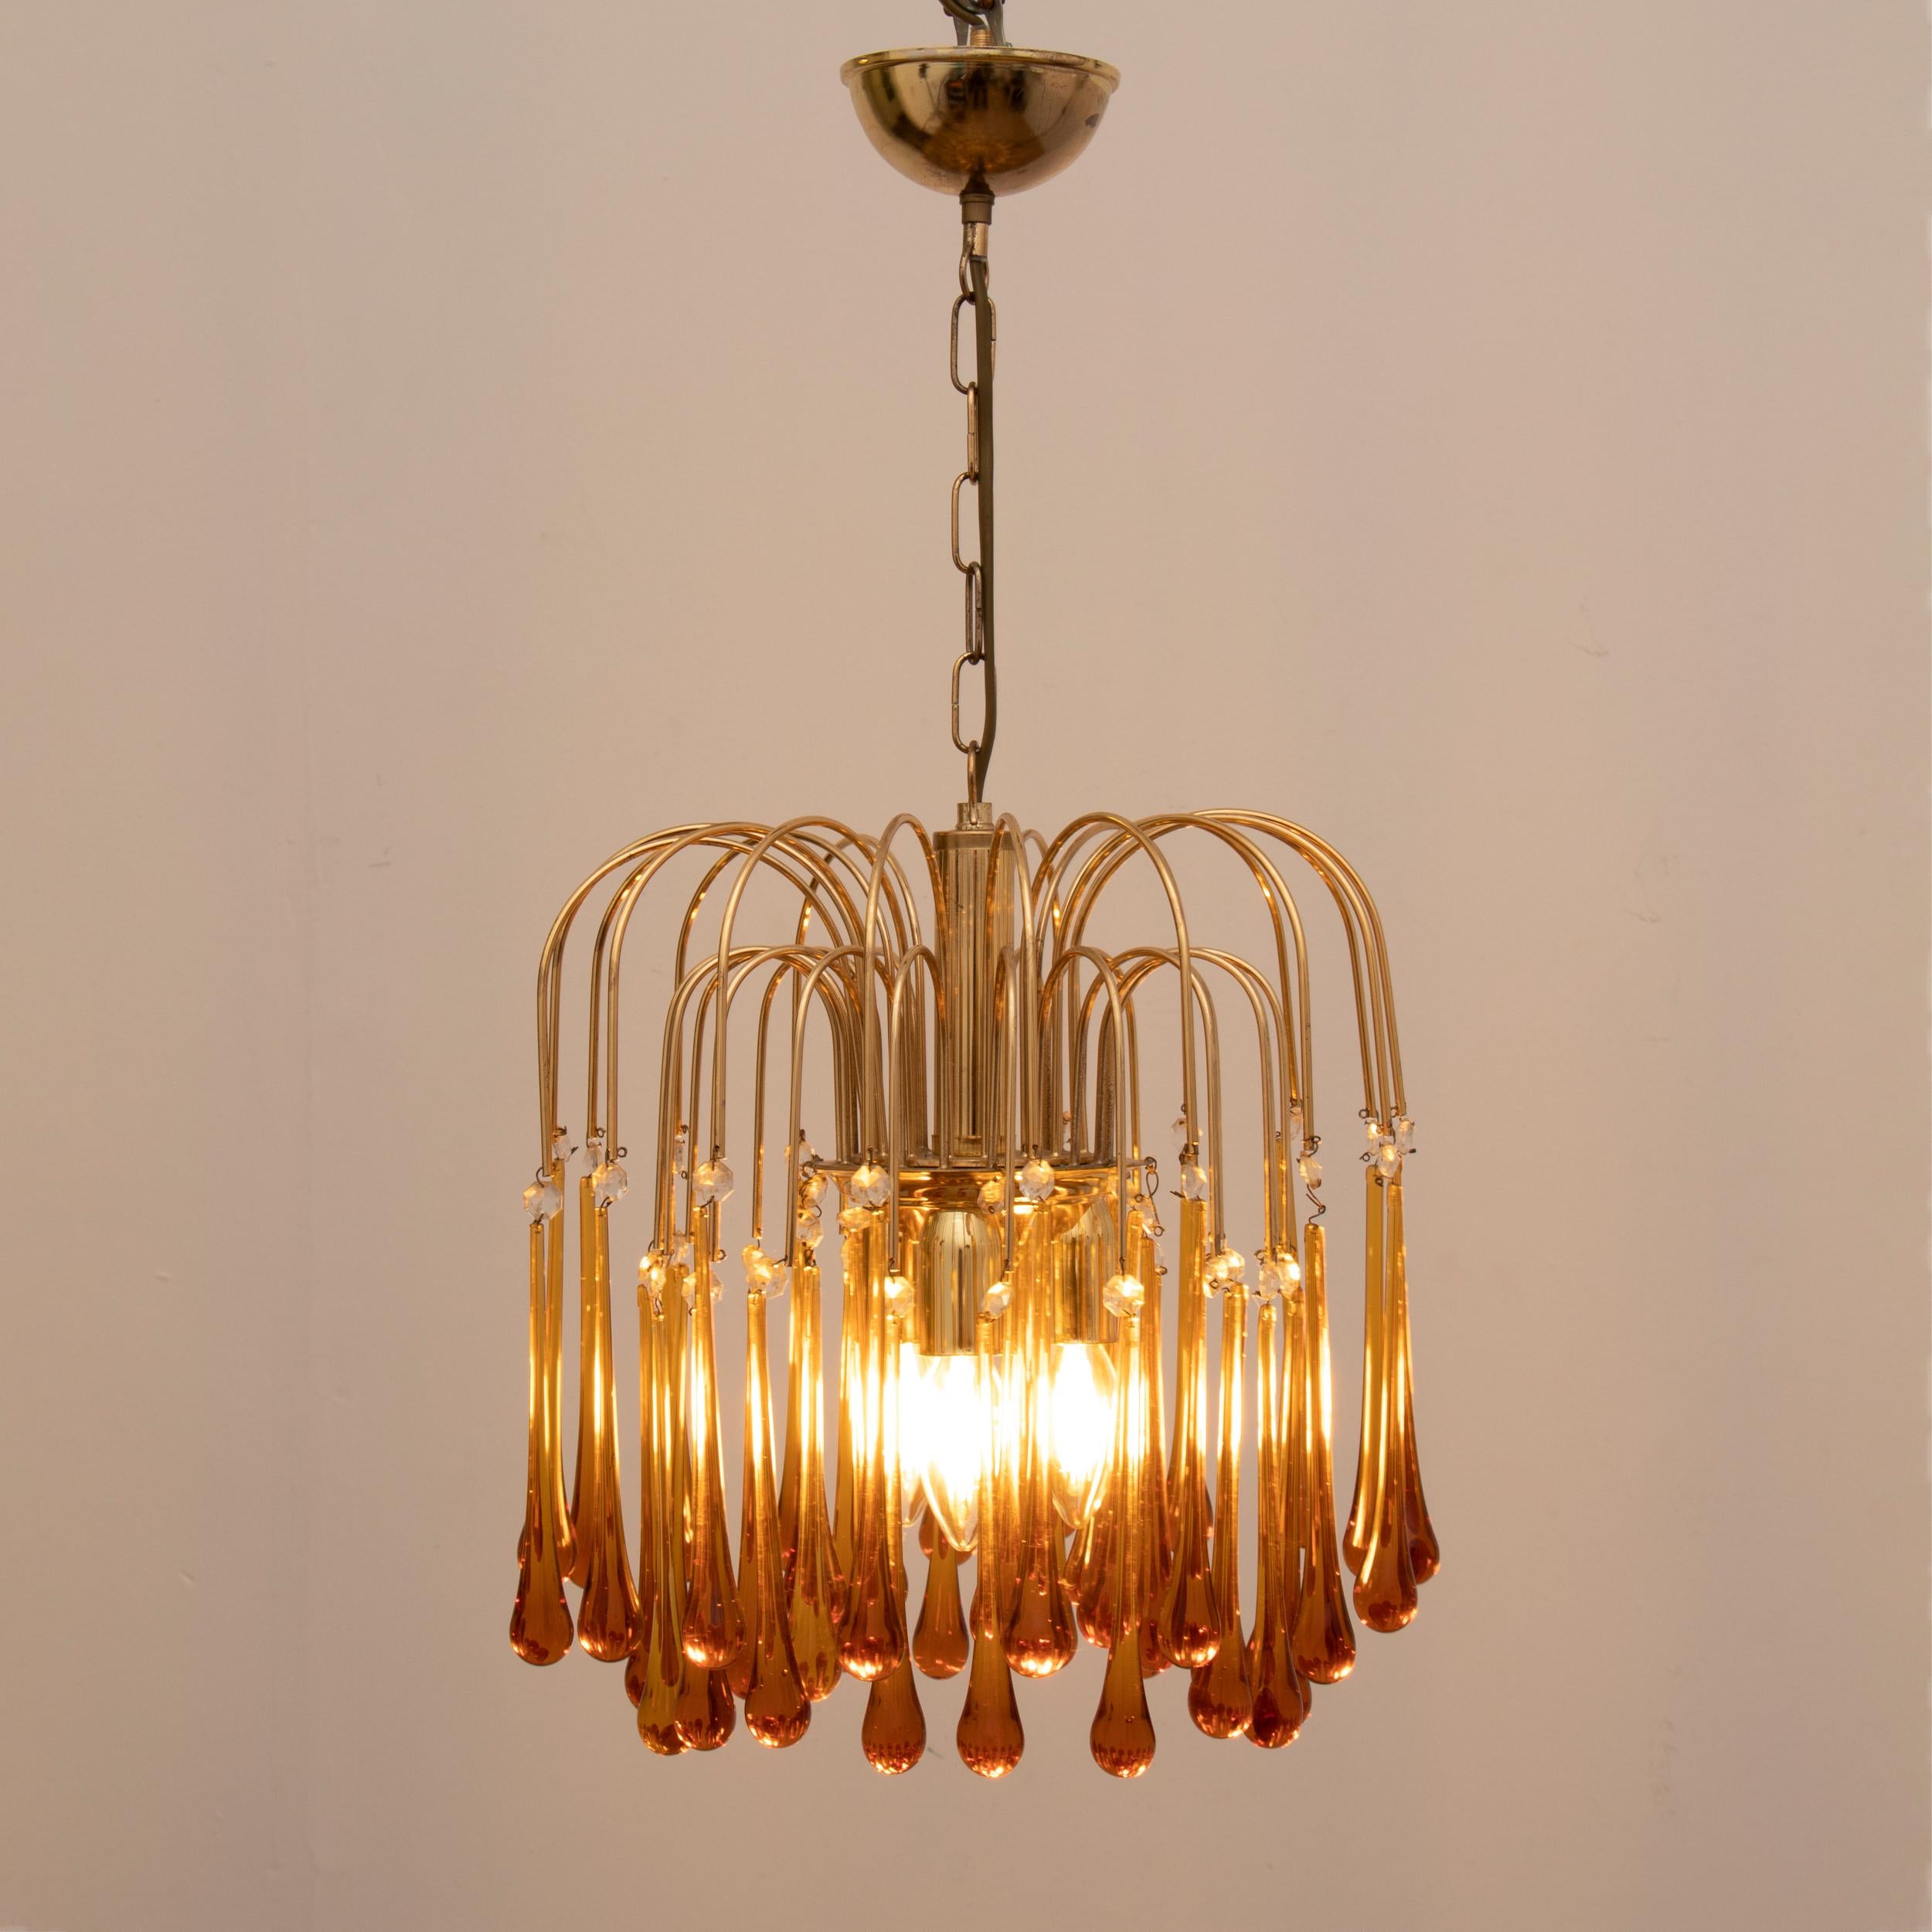 A small 1960s Italian Murano Amber glass, cascading, chandelier designed in the style of by Paolo Venini. There are three-tiers of amber glass teardrops suspended from brass stems with clear glass beads in between them. Three E14 screw in bulbs are